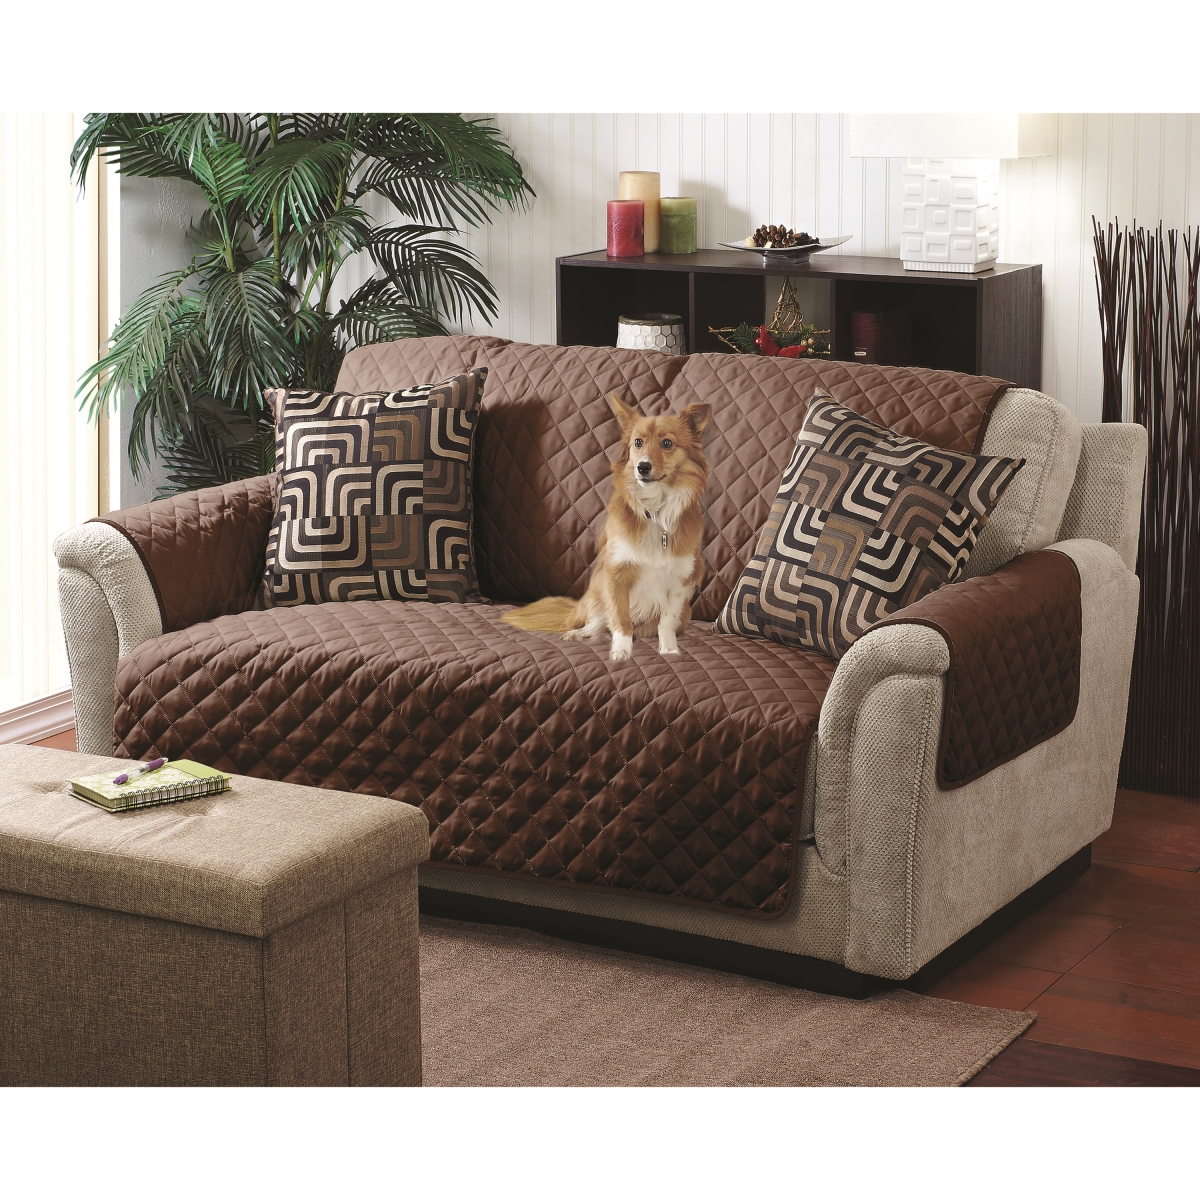 1682-choc-taupe Reversible Quilted Furniture Sofa Protector, Chocolate & Taupe